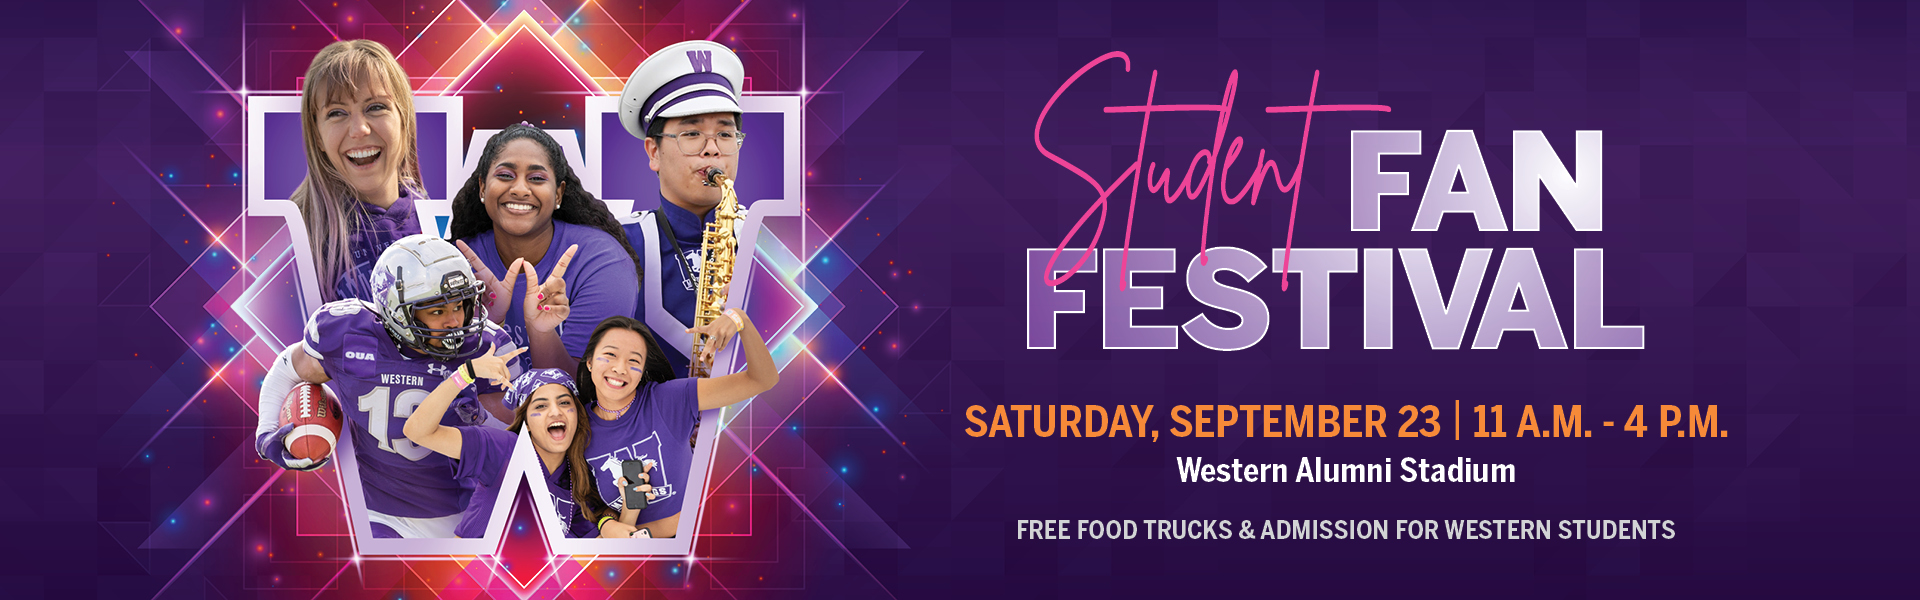 Student Fan Festival September 23 from 11 a.m. - 4 p.m.